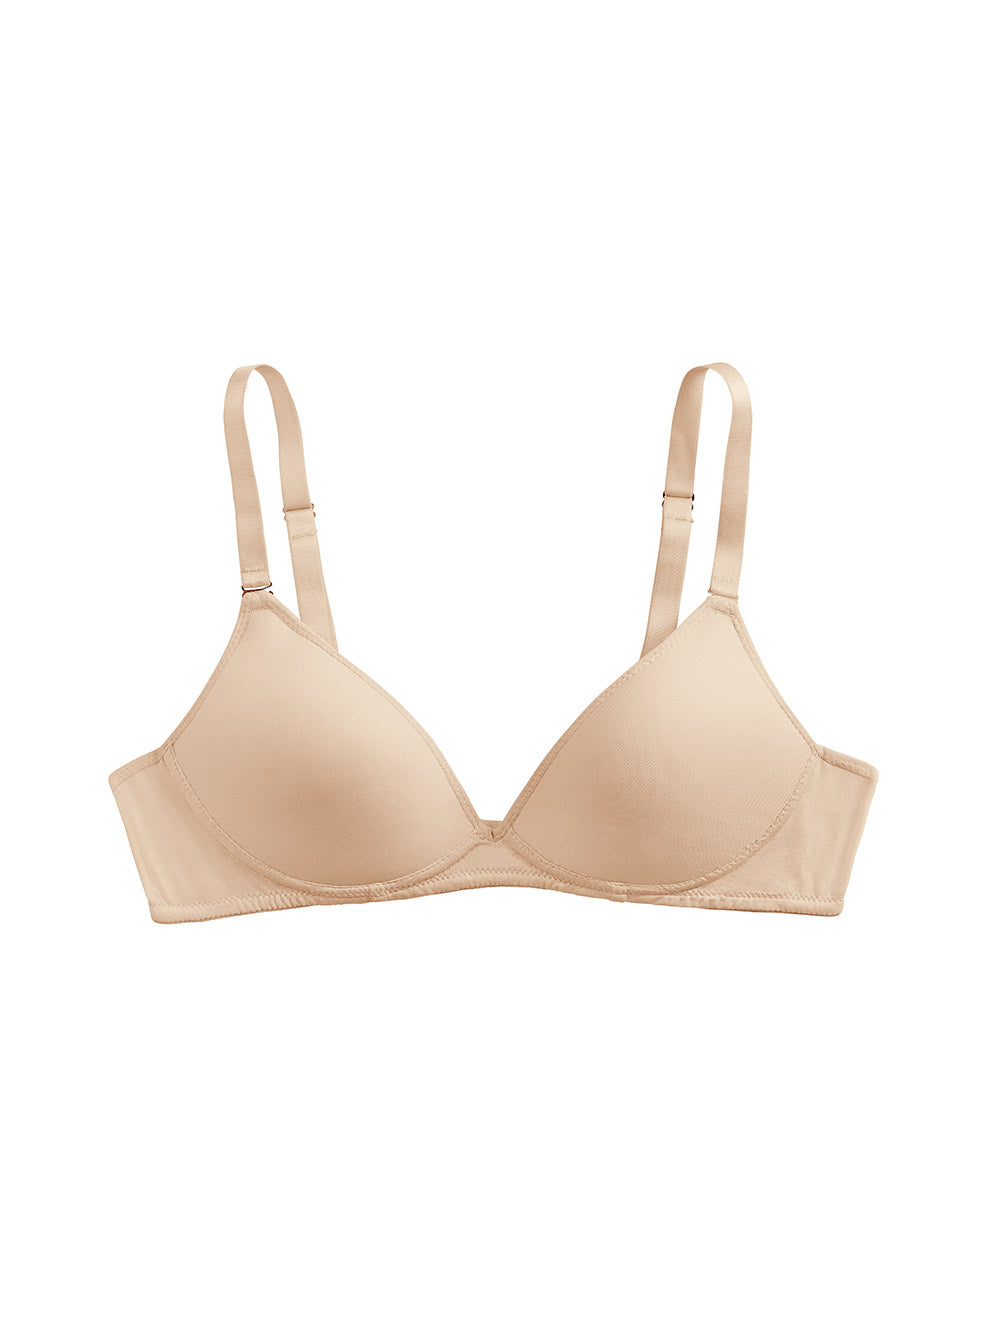 Lea Smooth Bra, Petite, Light Push-Up, Wire-free, Extra Support